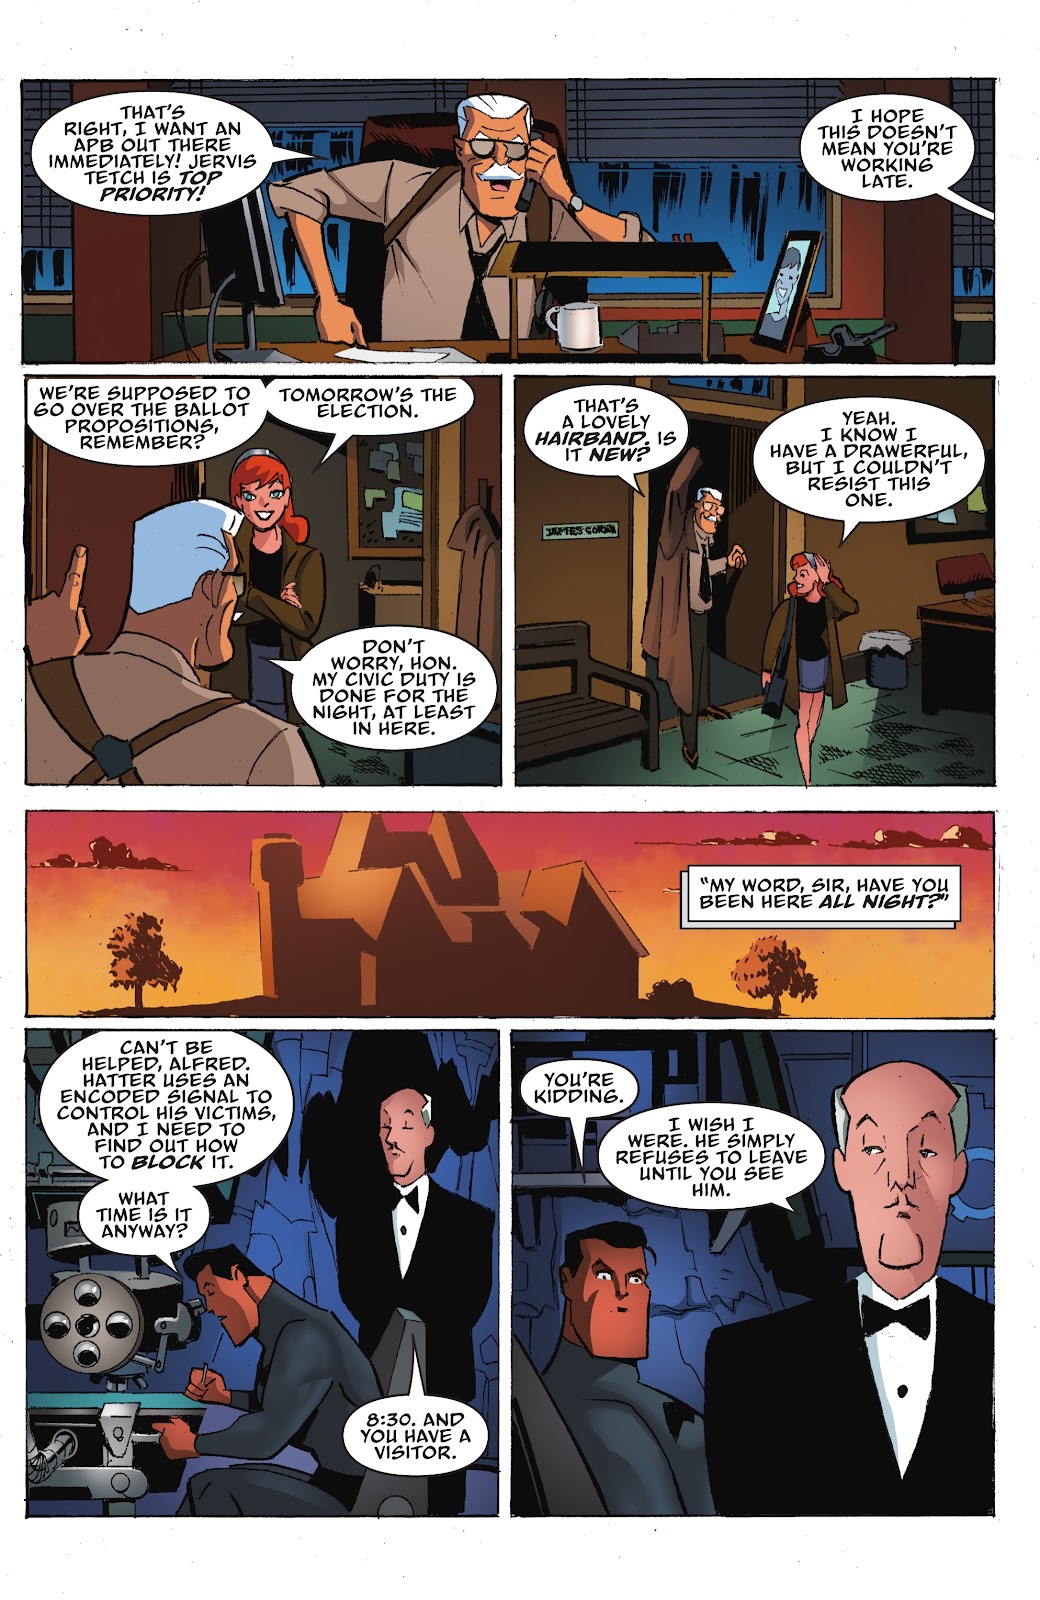 Batman: The Adventures Continue: Season Two issue 7 - Page 9